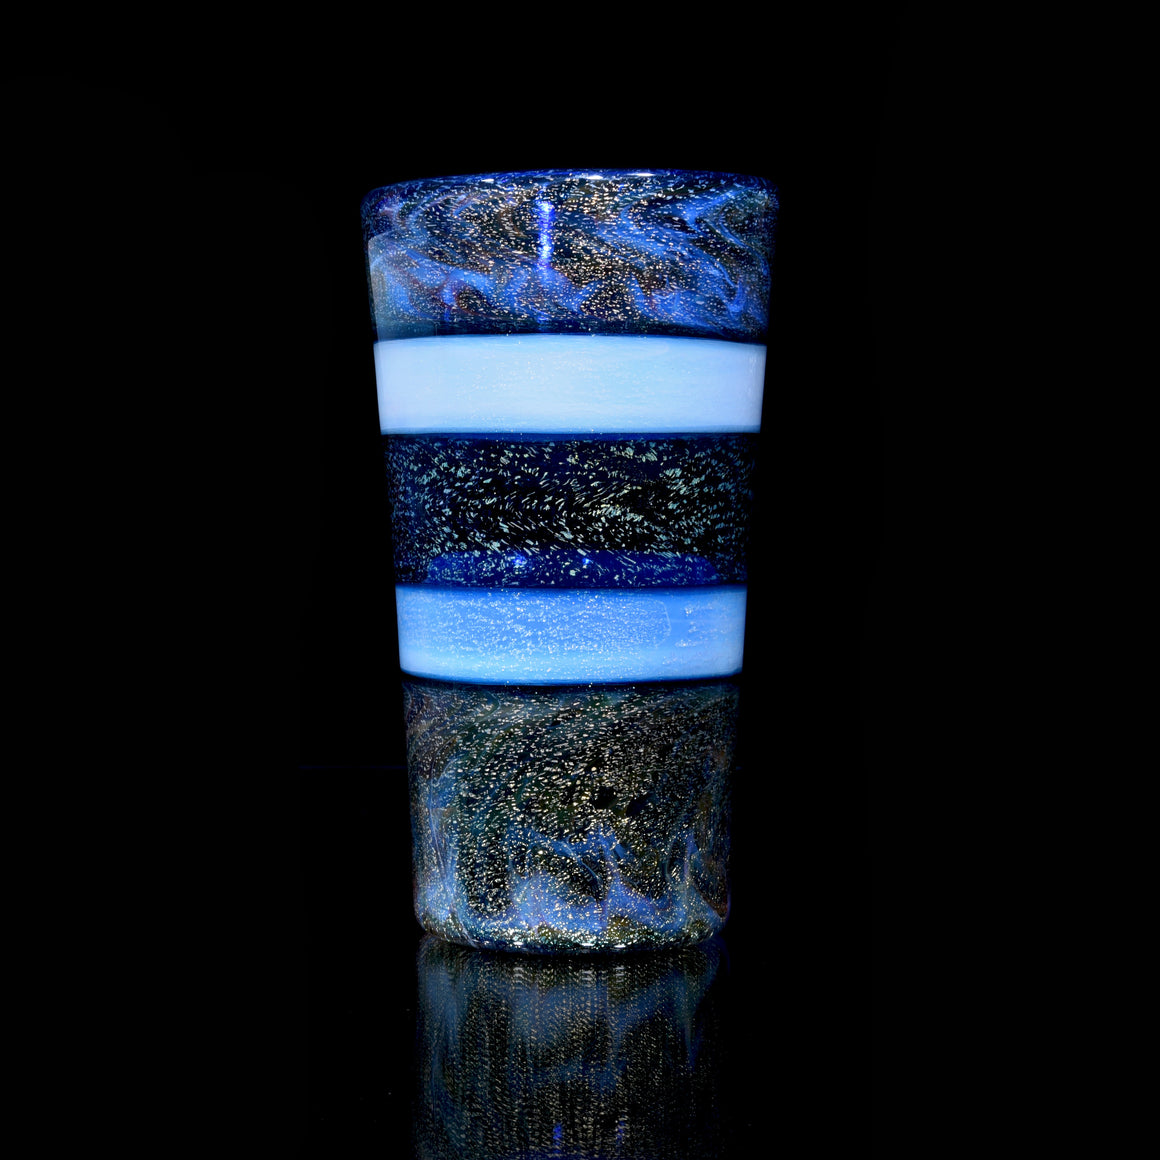 Fully-worked Dichroic Ghost/Brilliant Blue Pint Glass & Sake Set